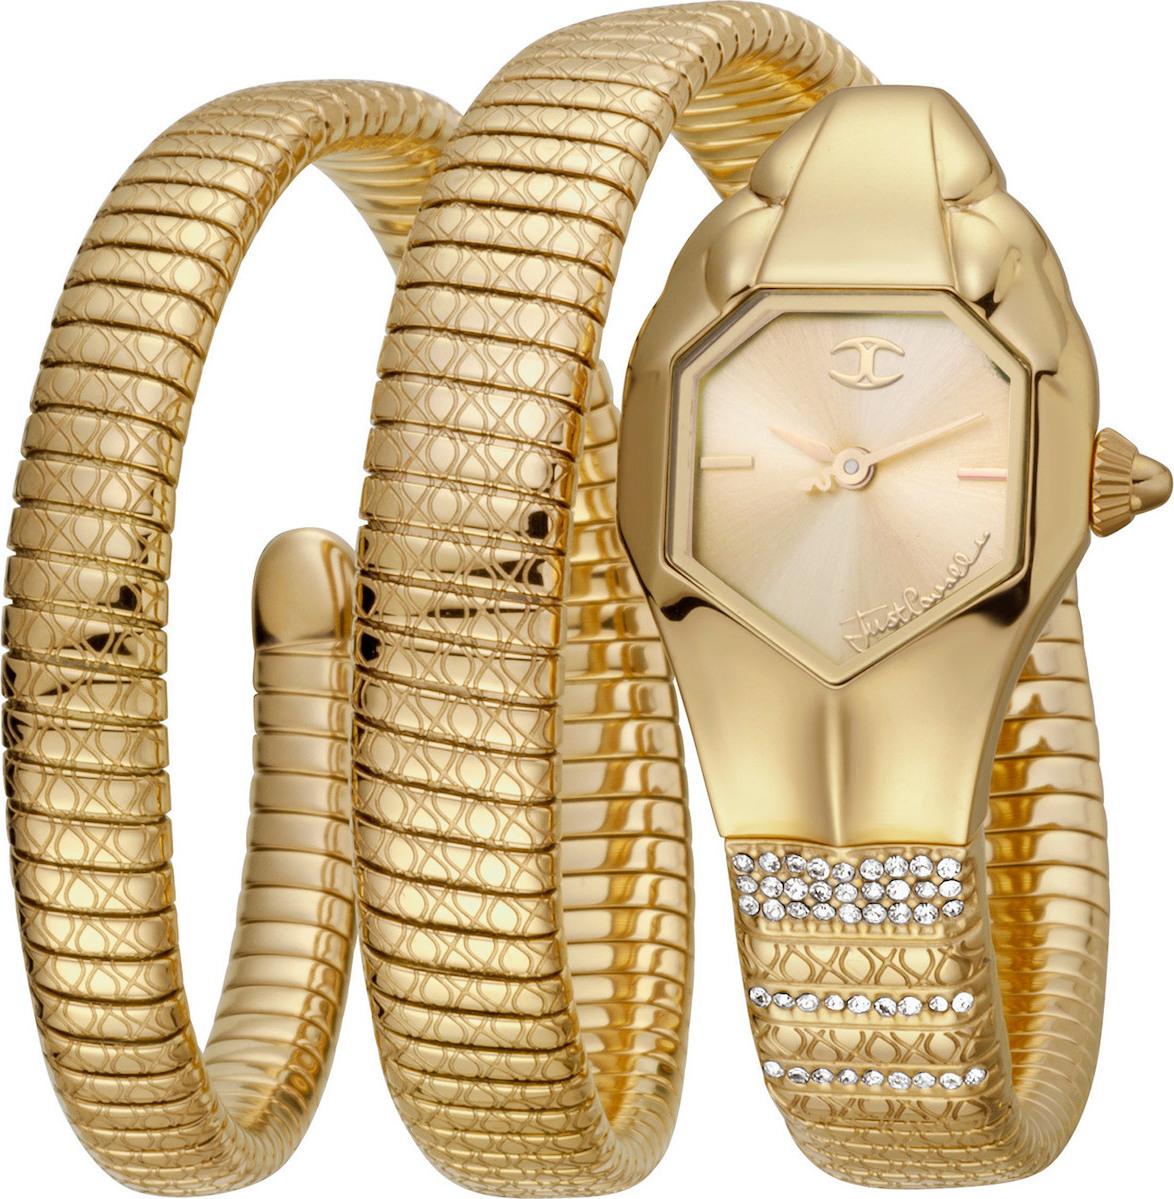 JUST CAVALLI Glam Chic Crystals - JC1L112M0025, Gold case with Stainless Steel Bracelet